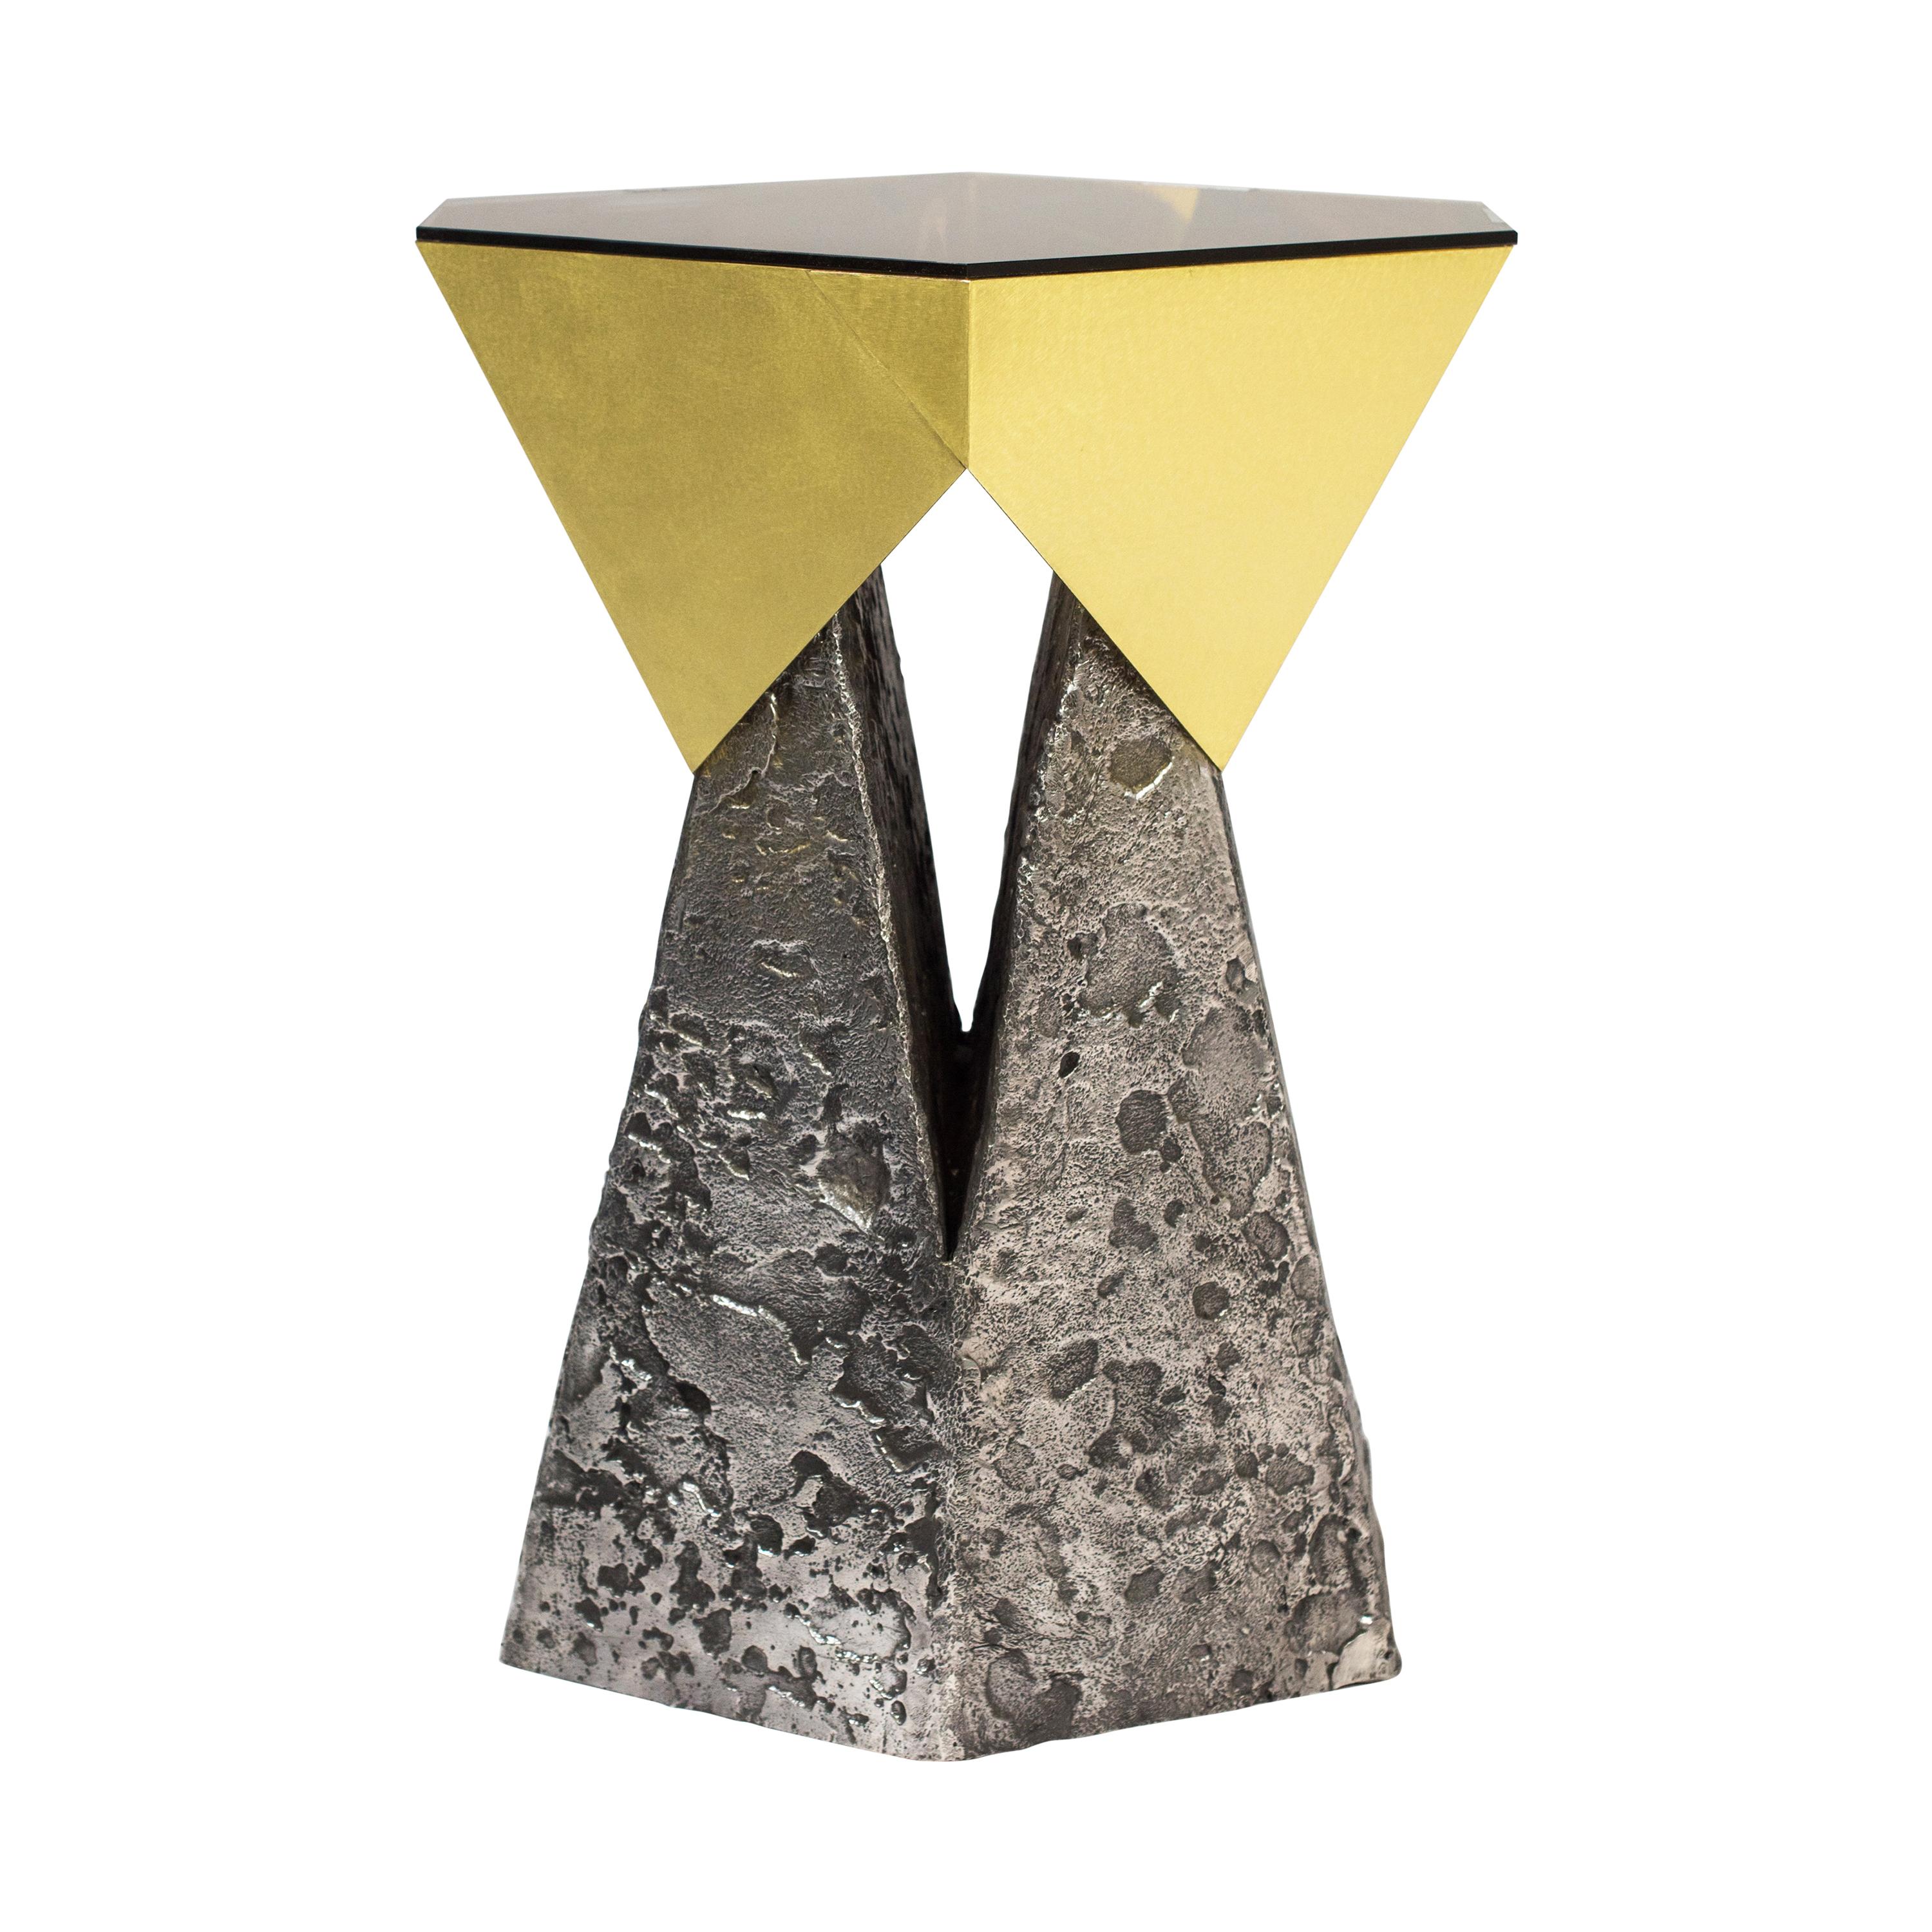 Aluminum and Brass "Palladium" Side Table by Arcana